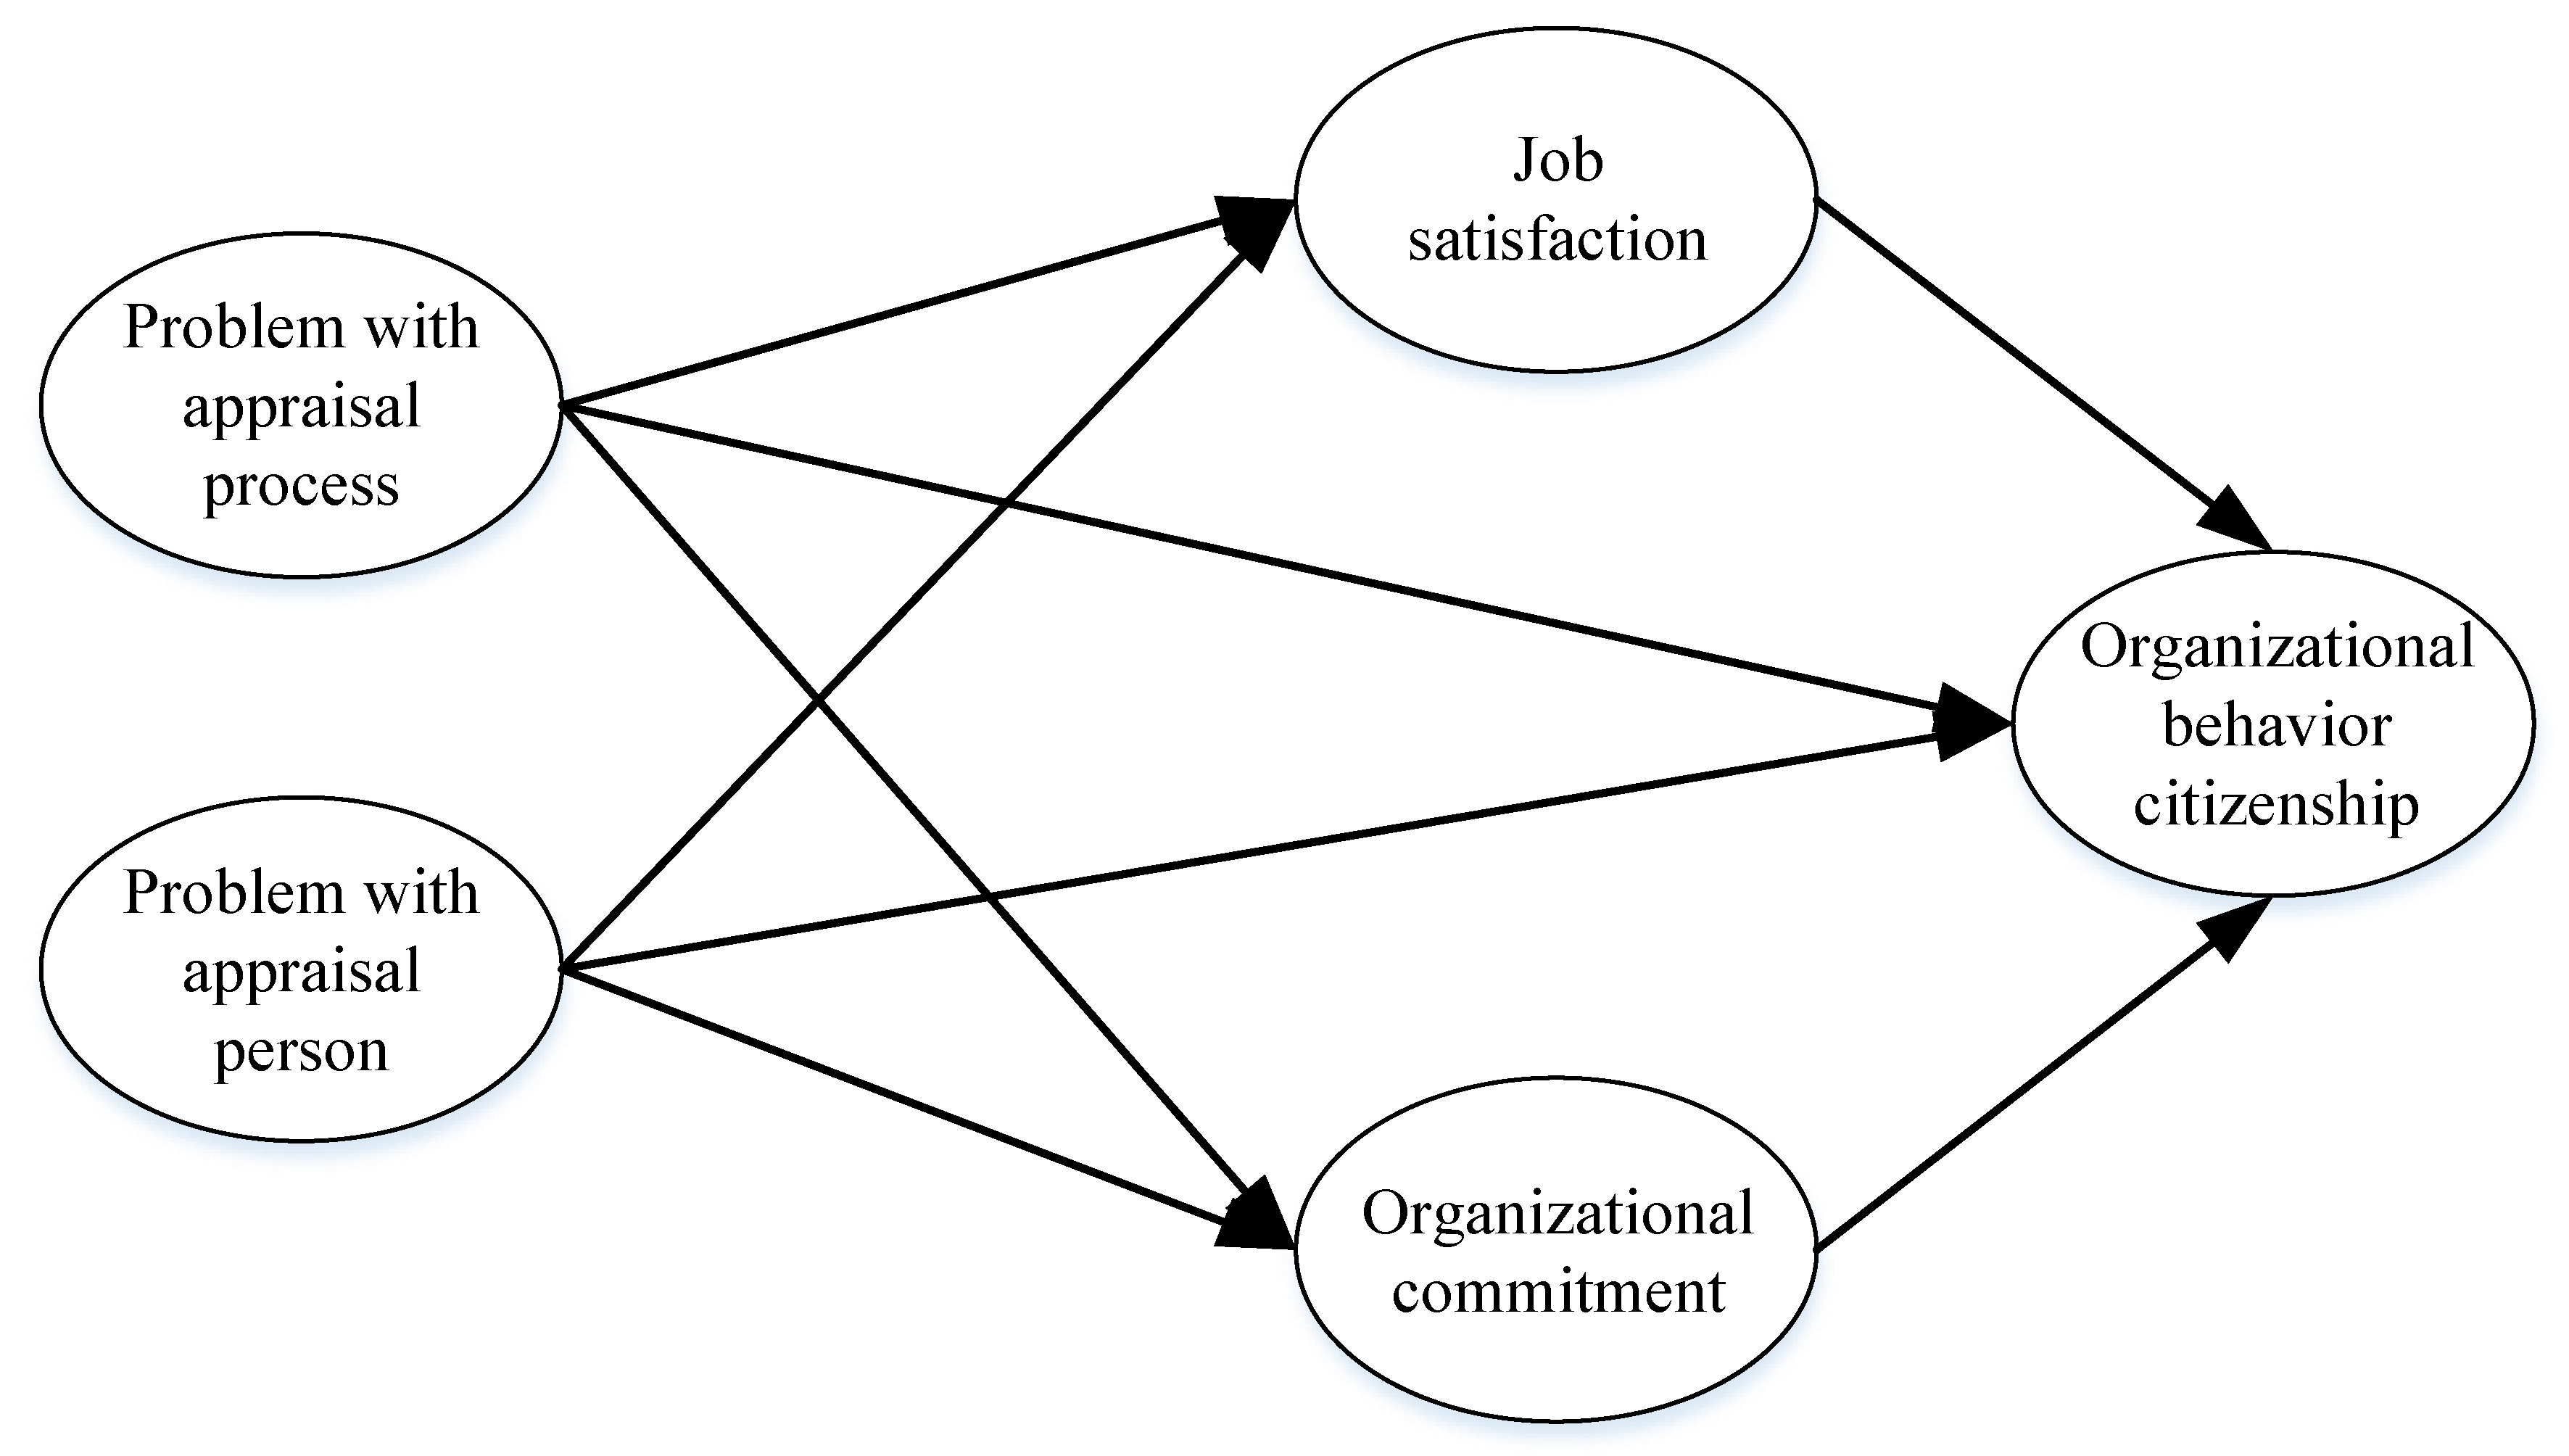 research problem on job satisfaction